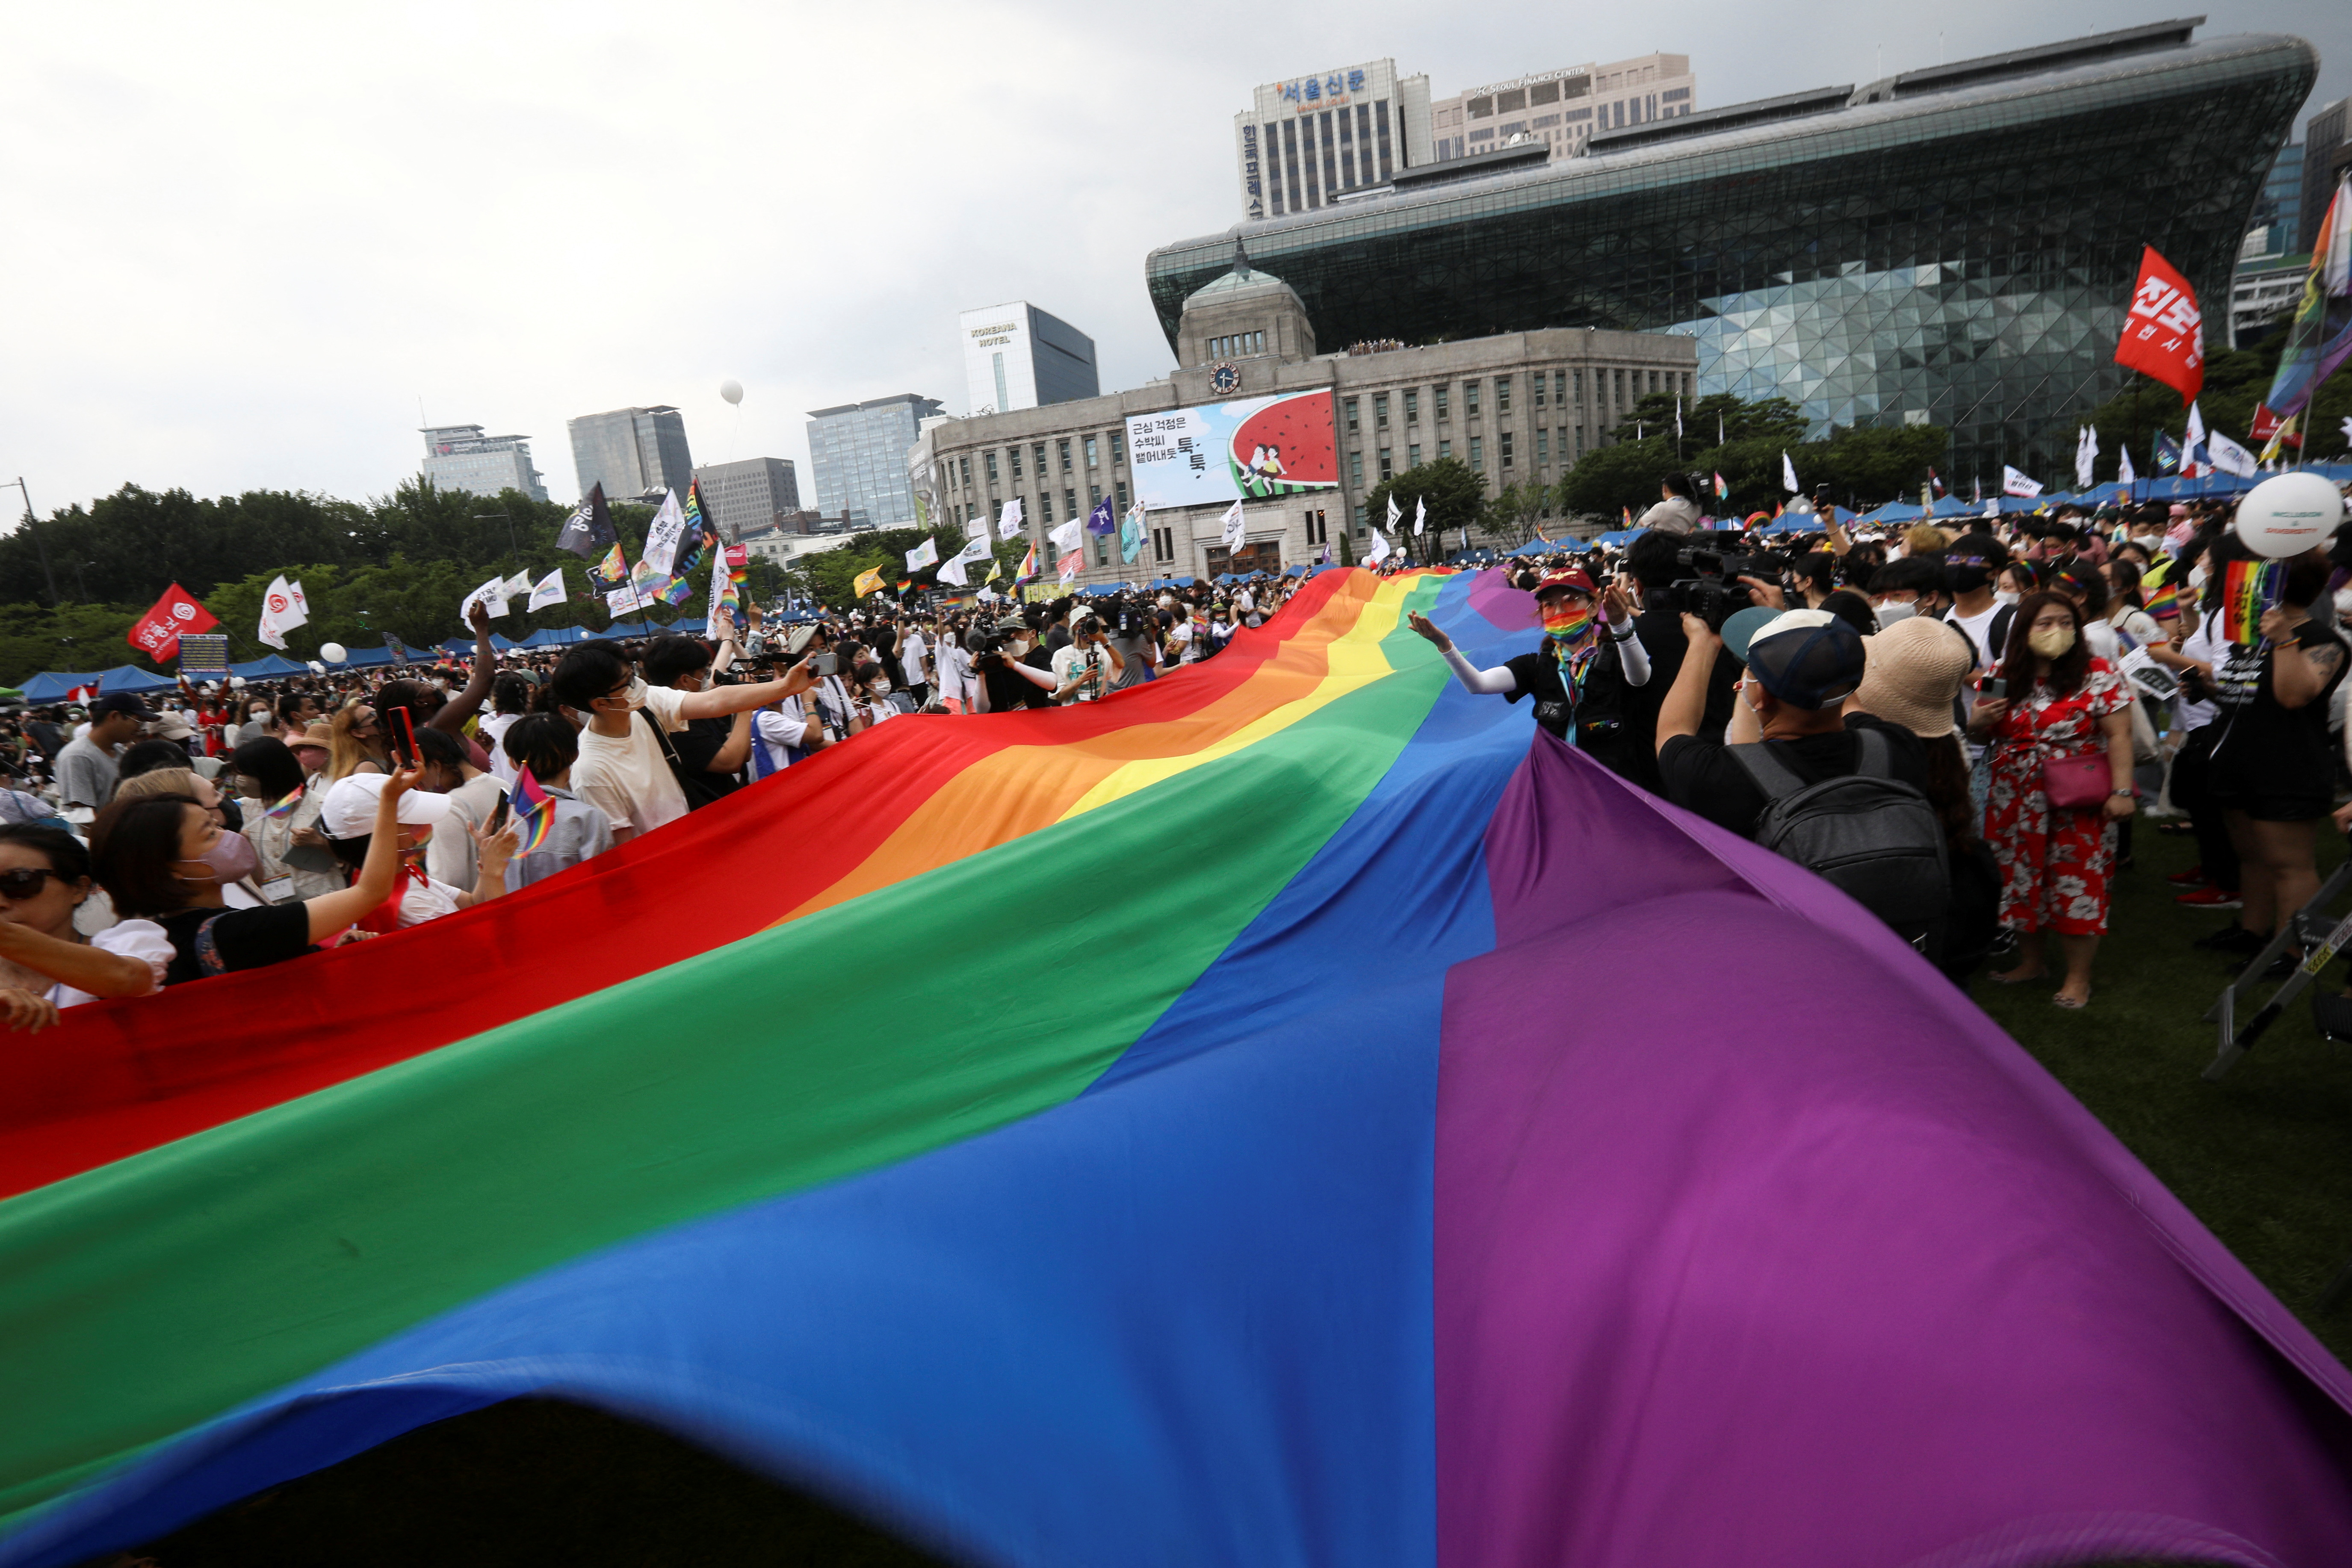 Participants wave rainbow flags during the Korea Queer Culture Festival 2022 in central Seoul